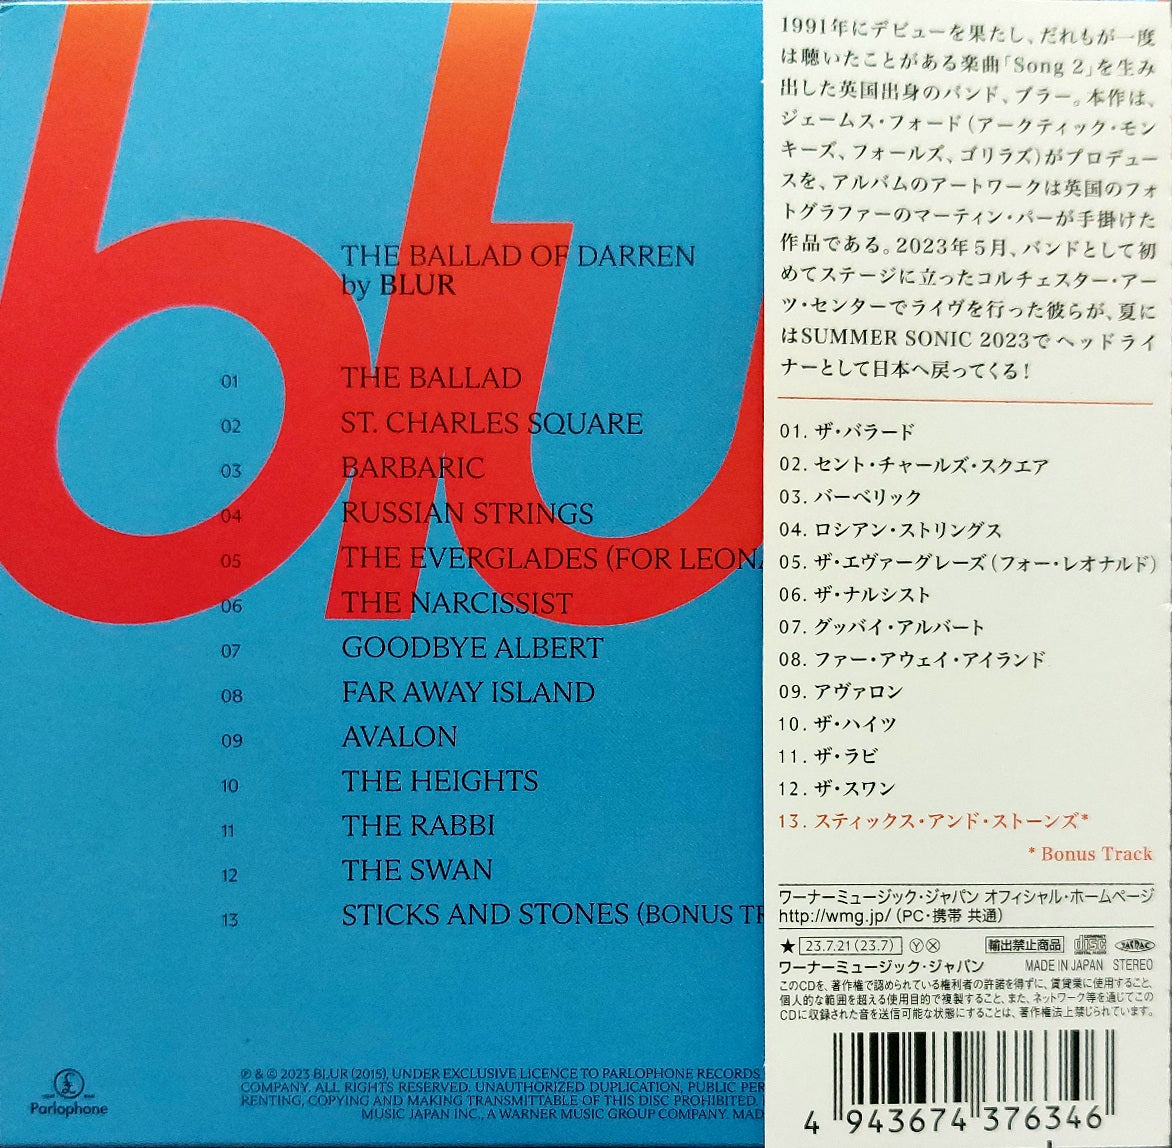 Pink Floyd: The Division Bell - Japanese Gatefold Mini-LP CD with Obi –  Rubber-Duckee